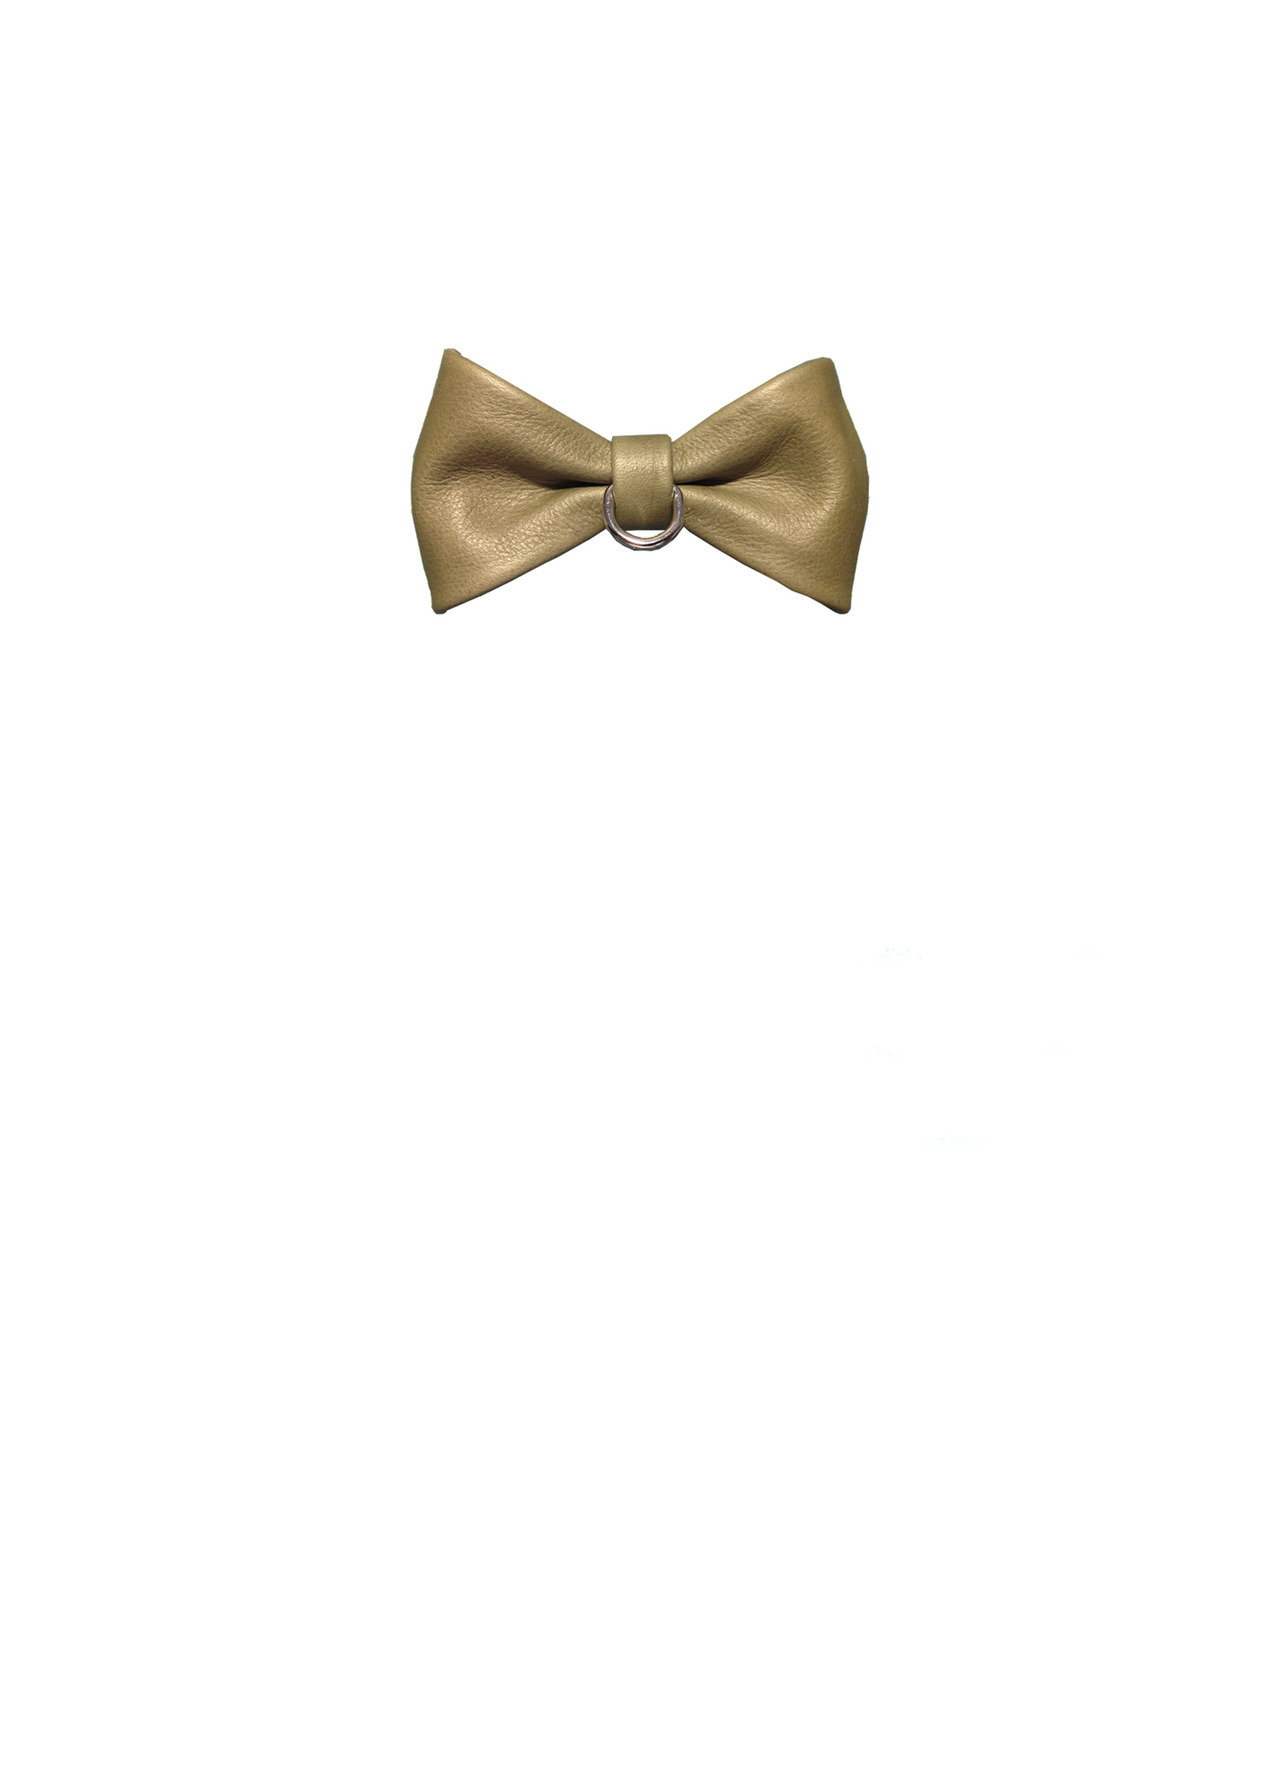 randleather:  Formal Bow Tie &amp; Bow Tie Collar. Available for purchase in